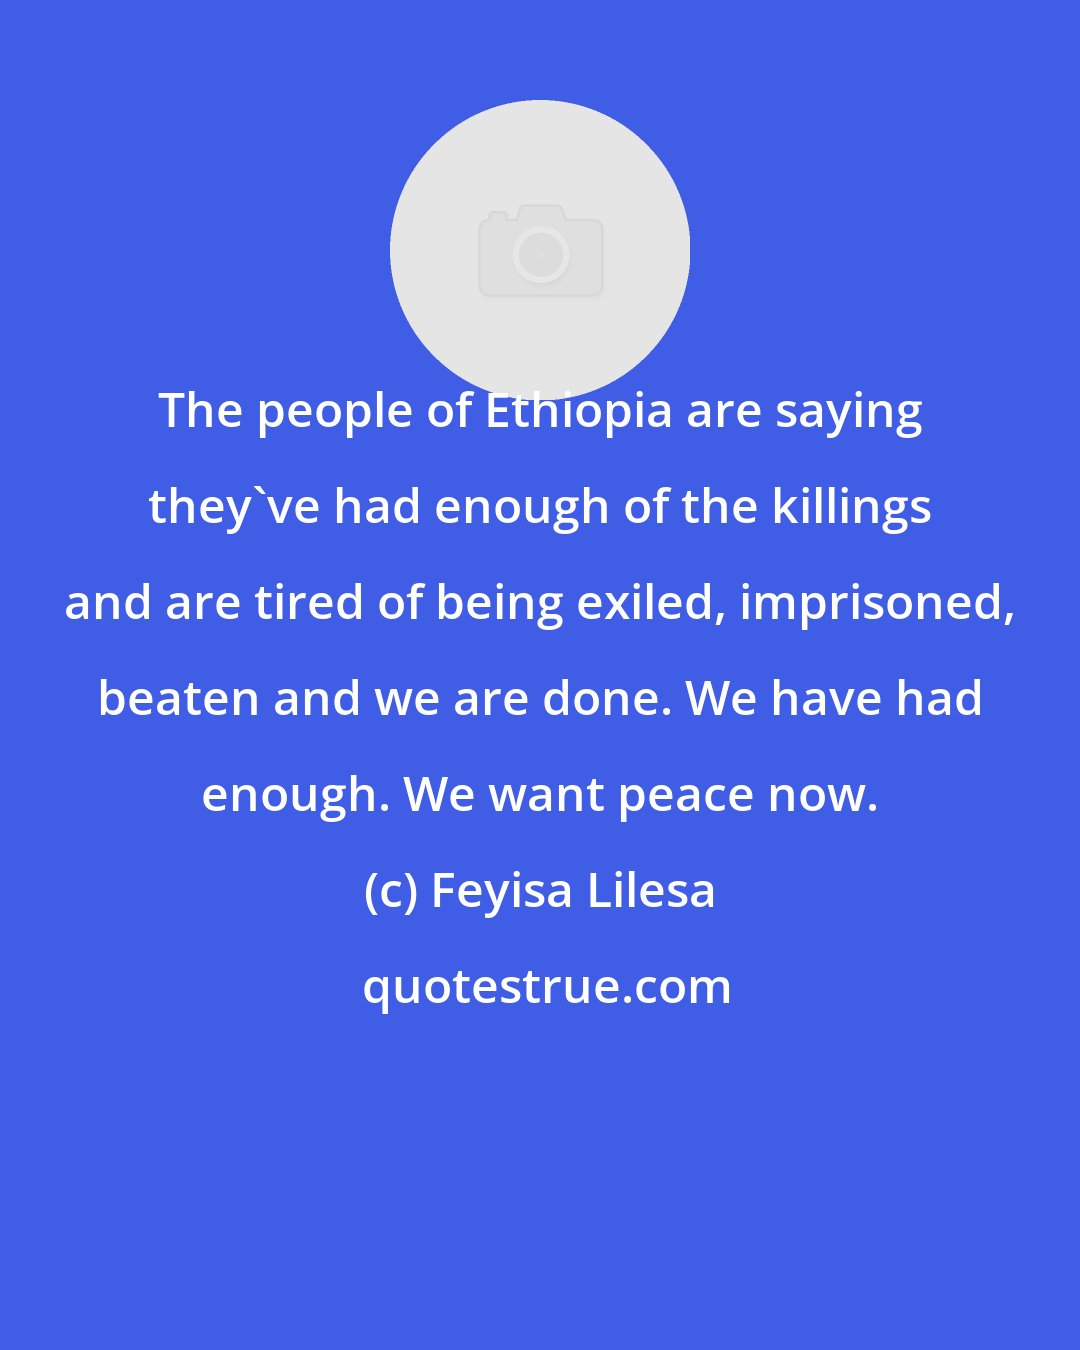 Feyisa Lilesa: The people of Ethiopia are saying they've had enough of the killings and are tired of being exiled, imprisoned, beaten and we are done. We have had enough. We want peace now.